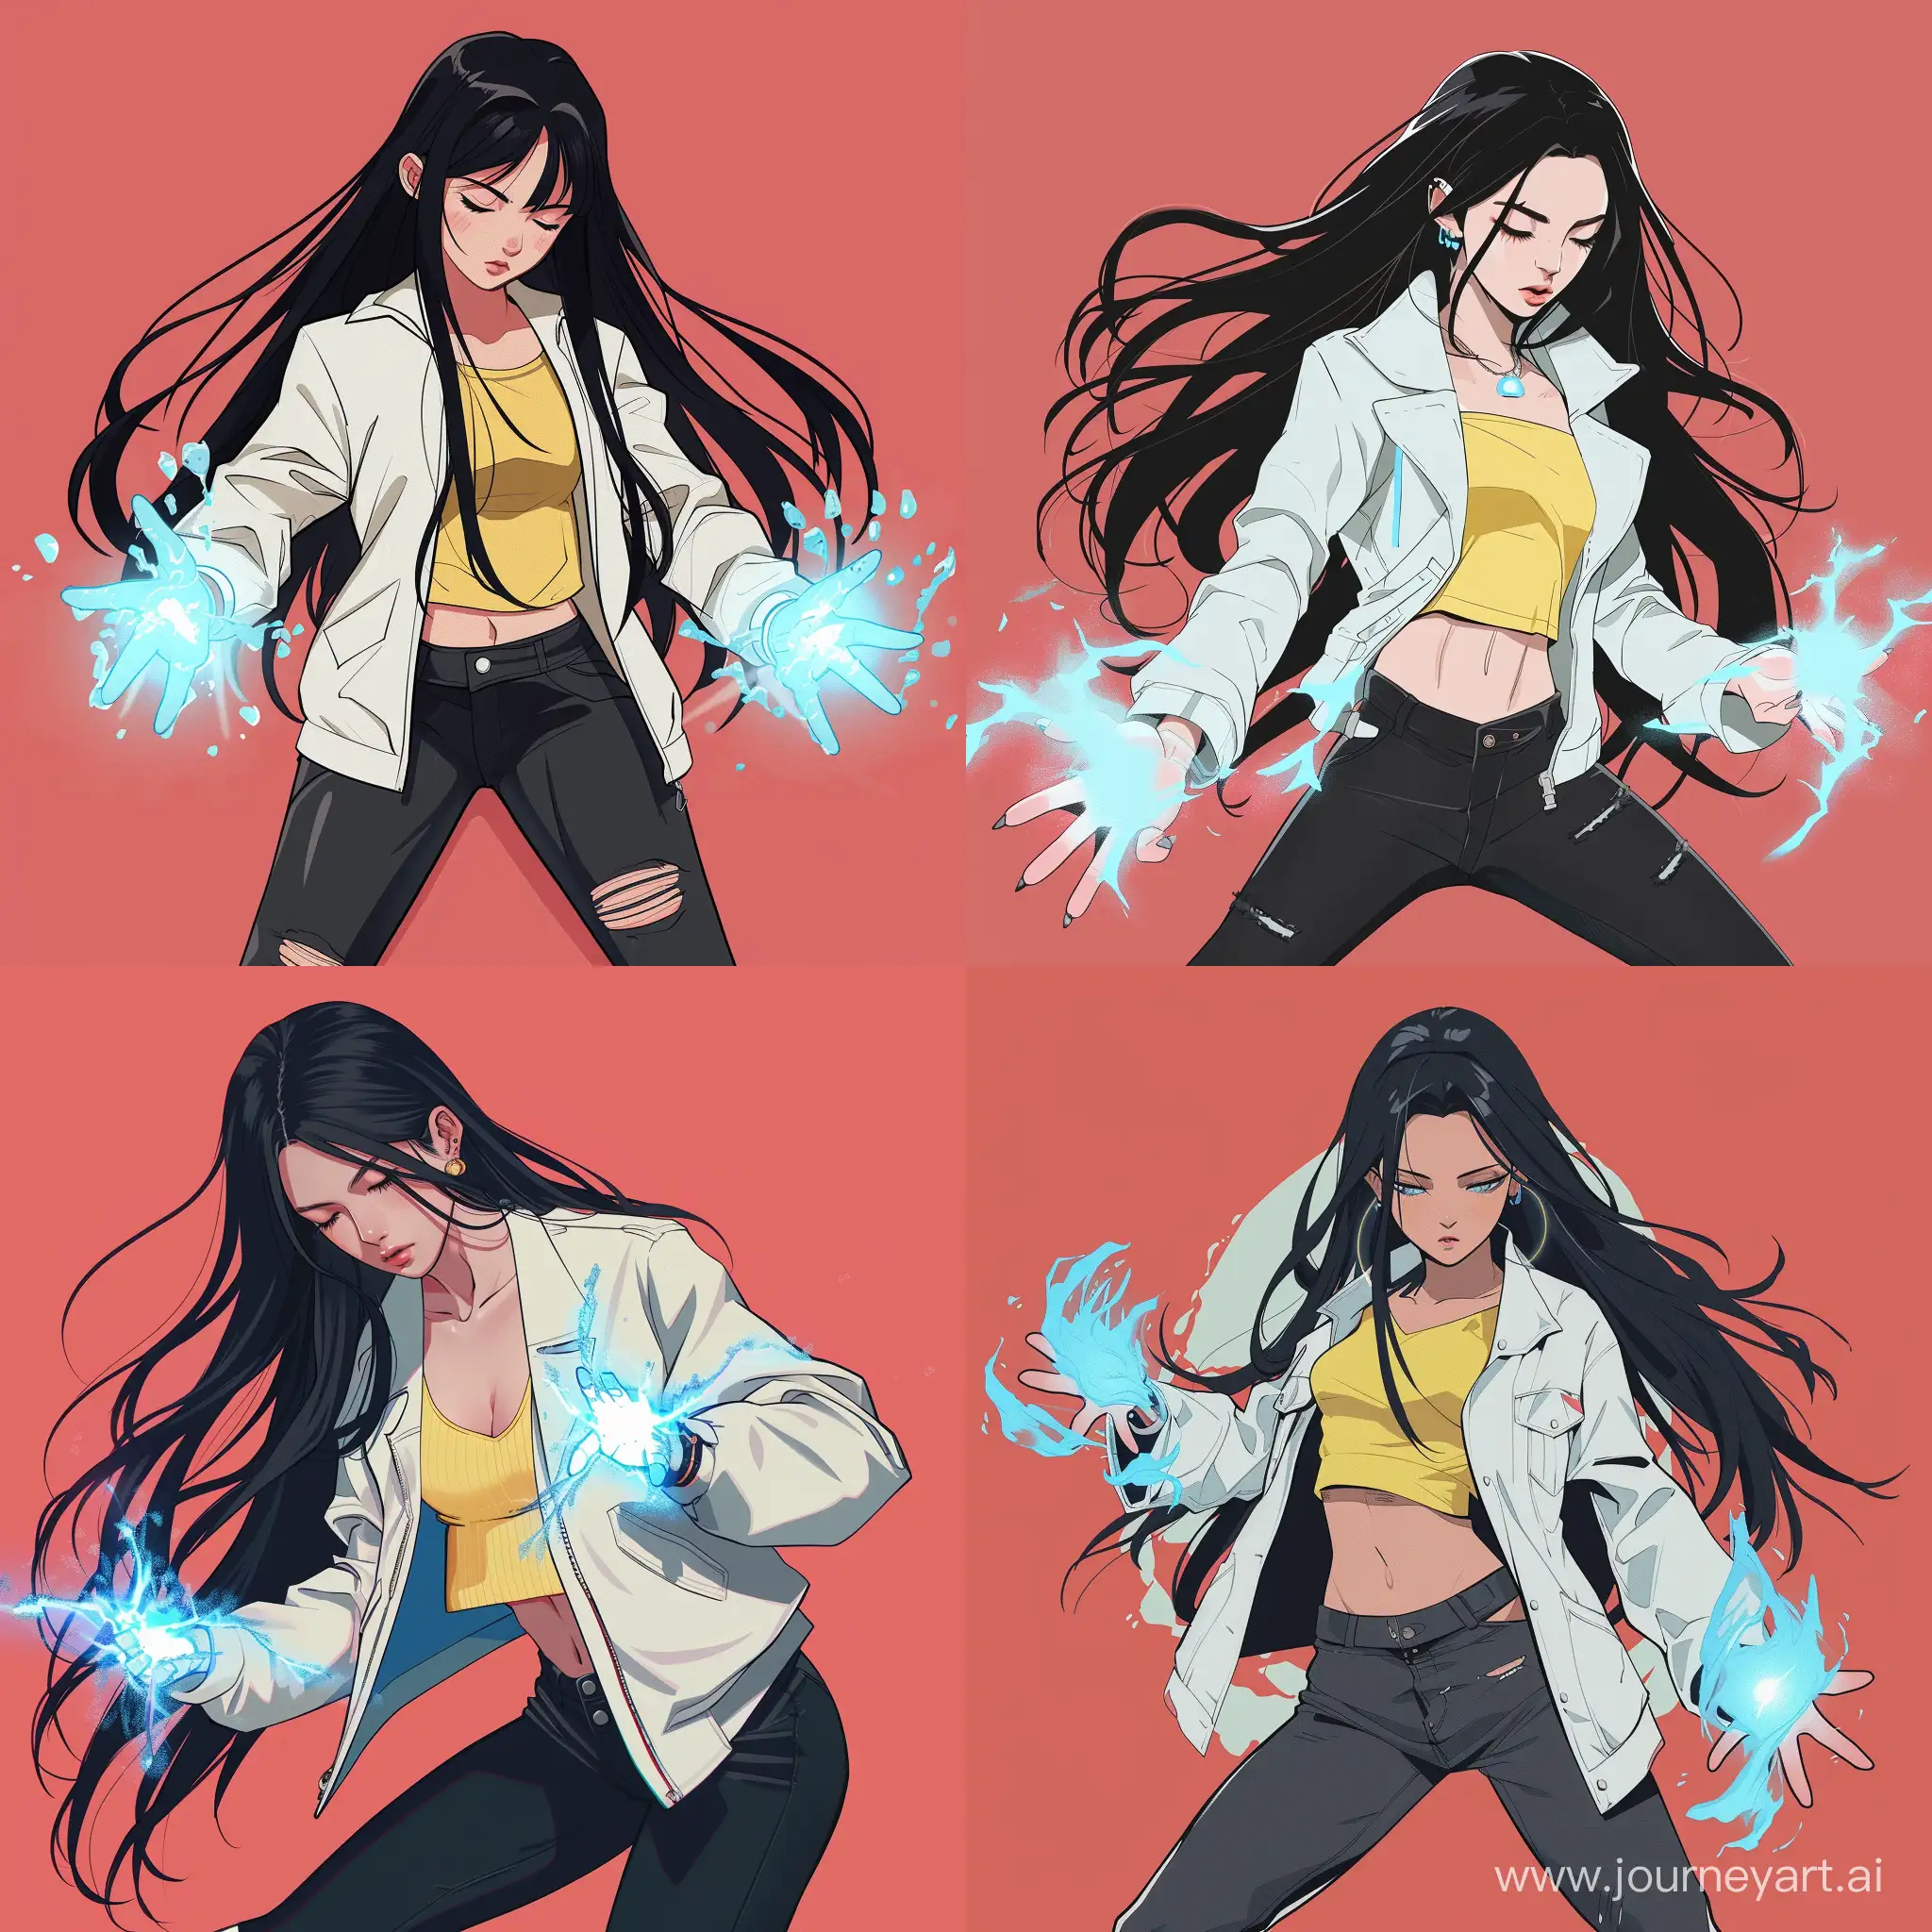 Anime style. Light red background. A woman with long black hair. She got droppy sleepy eyes. She's wearing a white jacket with a yellow cropped shirt underneath. She's using black skinny pants with white shoes. She's using blue eletric superpowers from her hands